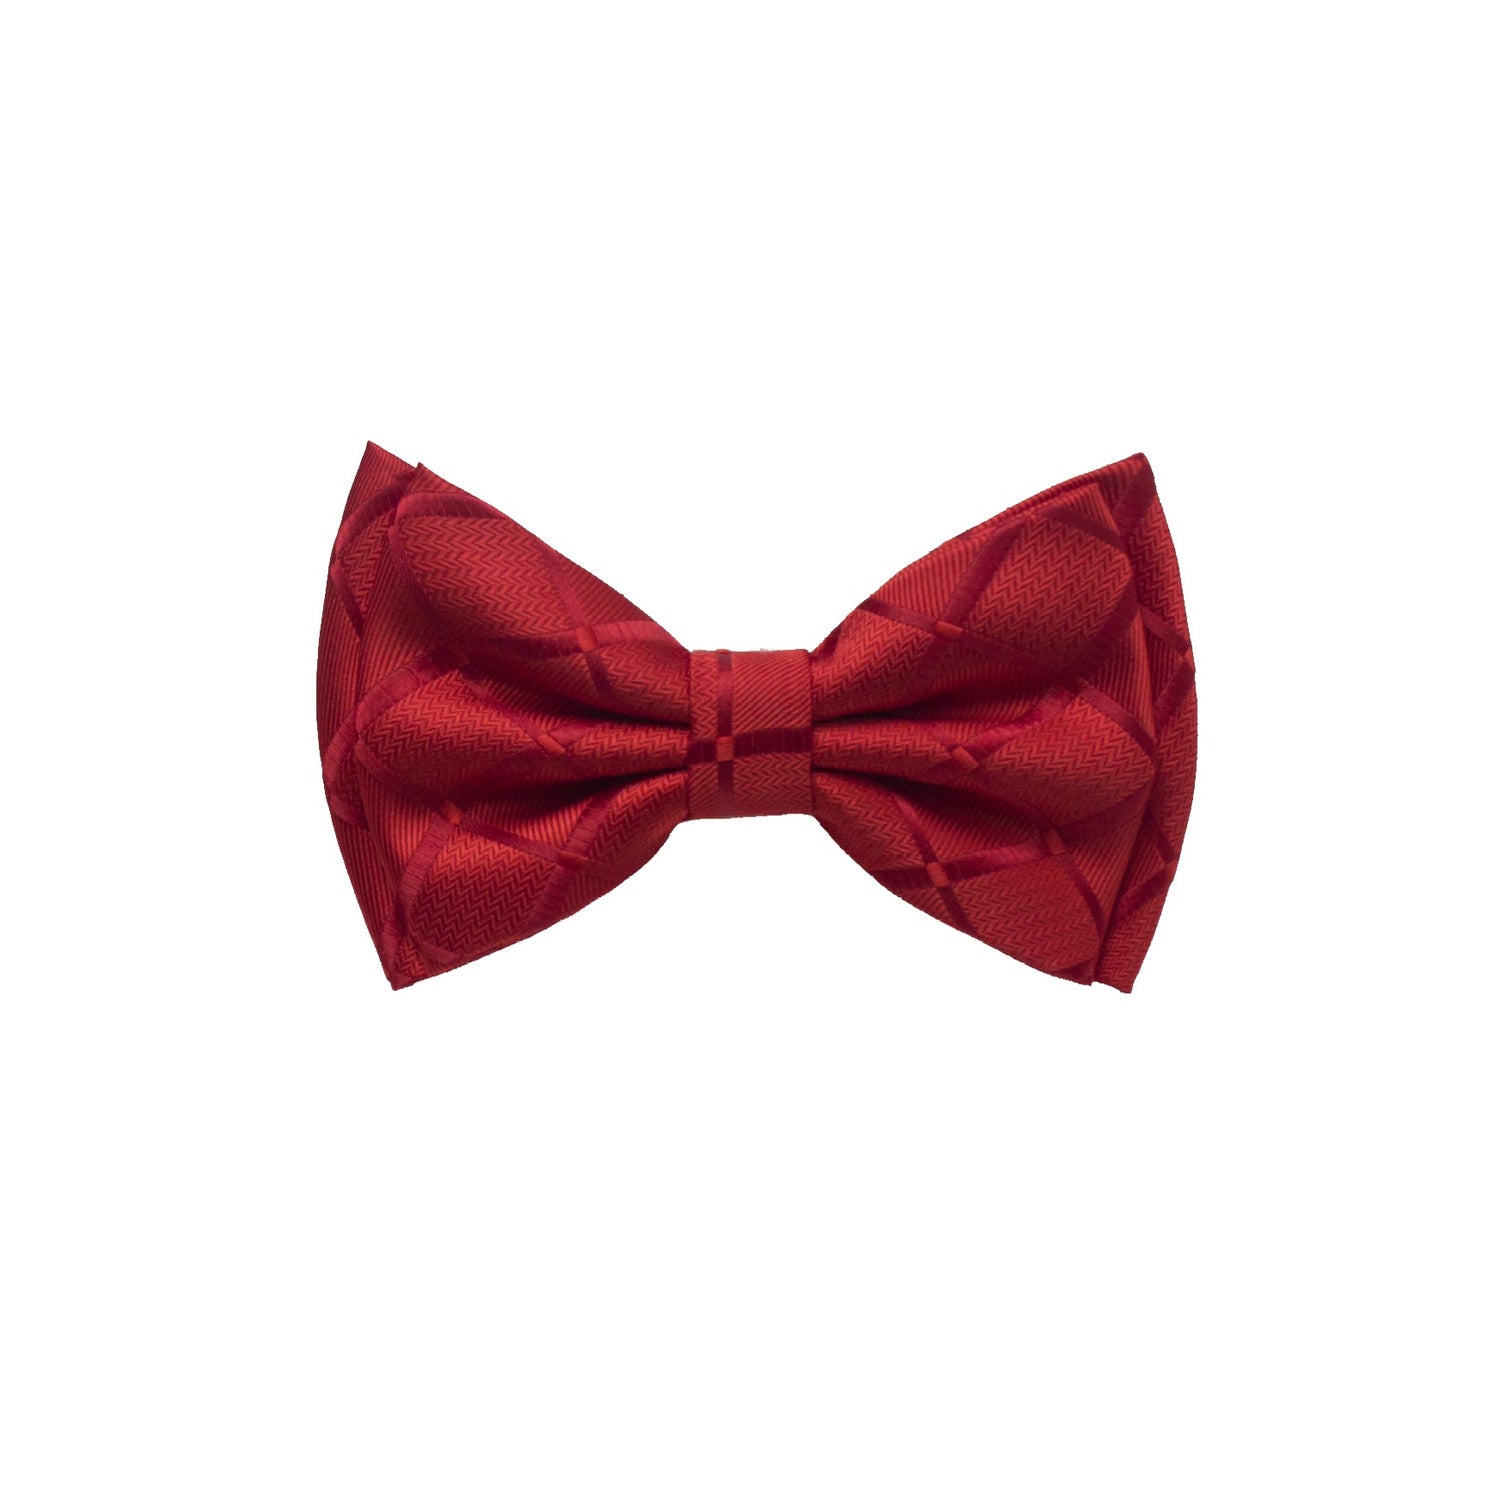 Solid Red with Geometric Texture Bow Tie